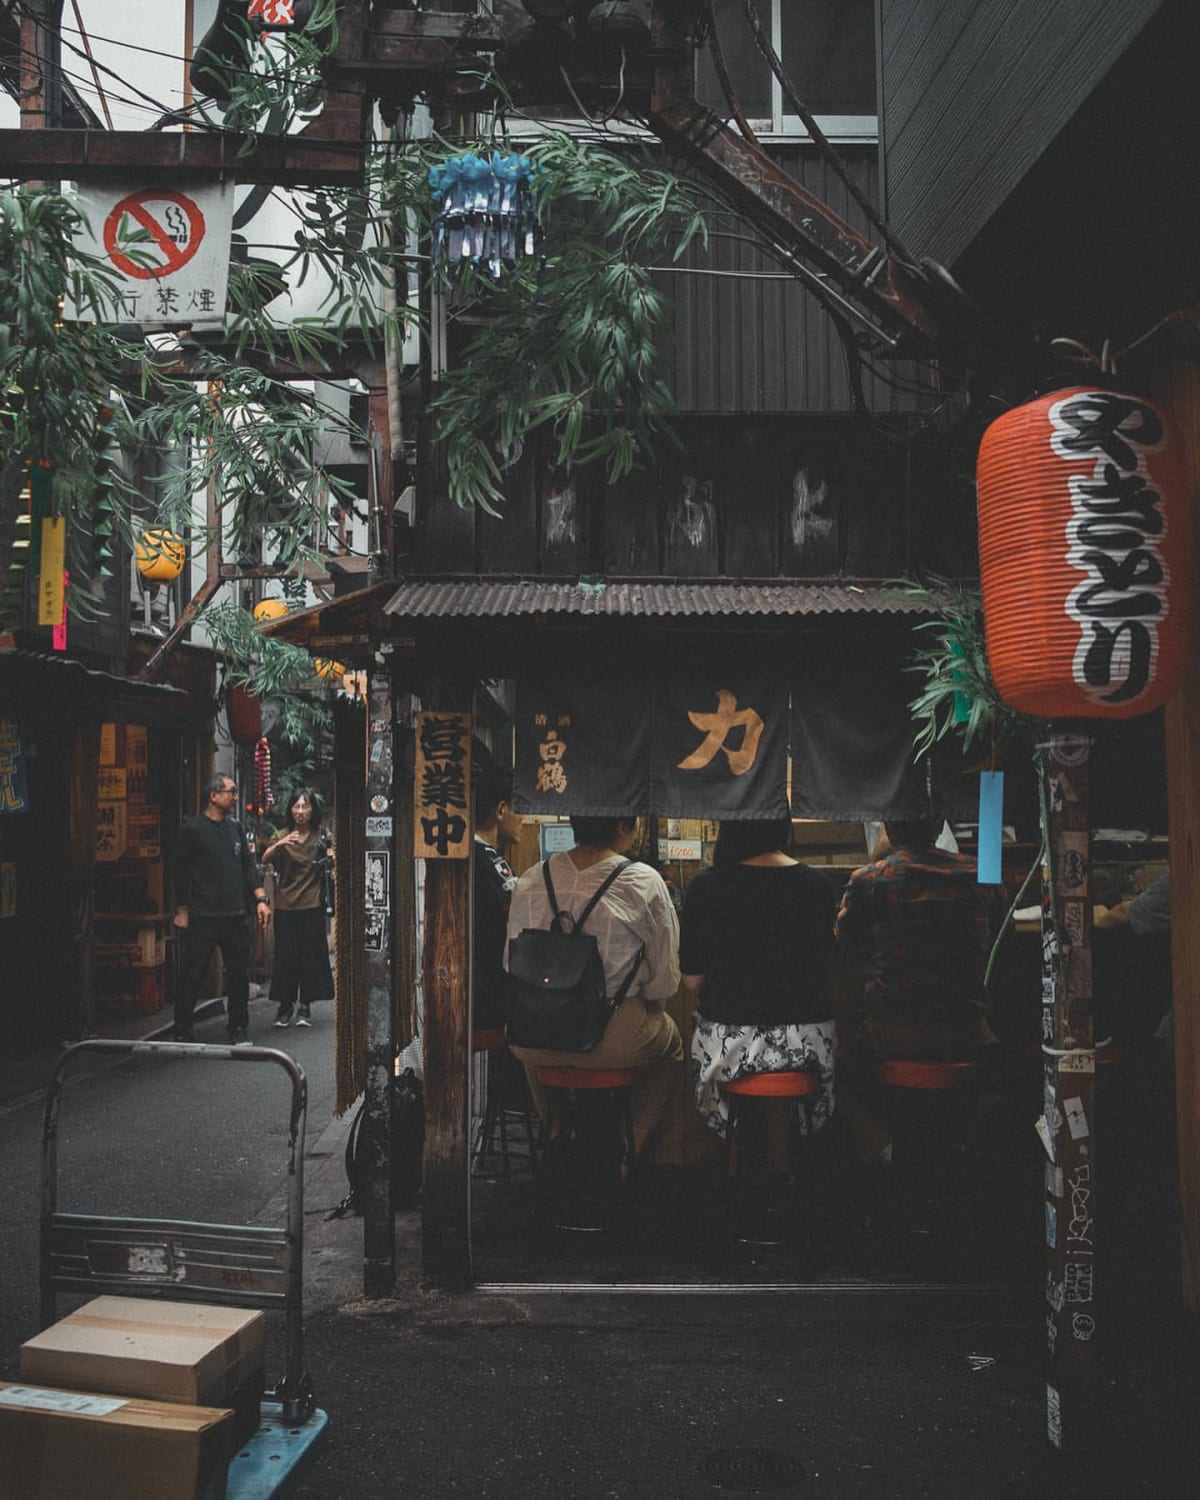 Stunning and Cinematic Street Photography in Japan by Hiro Goto